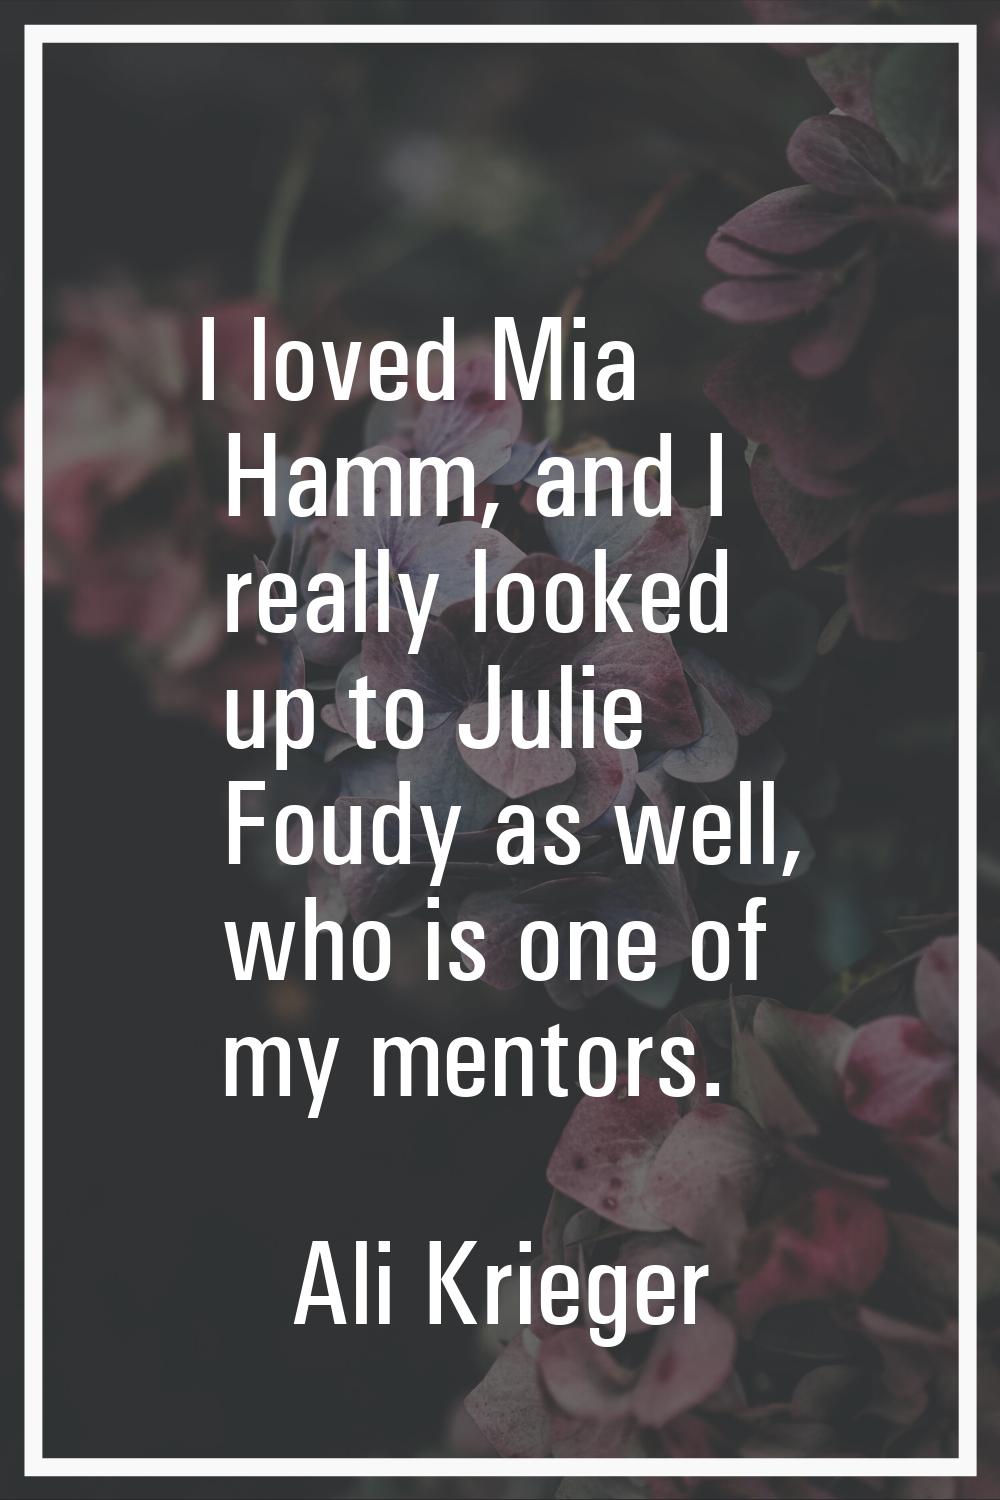 I loved Mia Hamm, and I really looked up to Julie Foudy as well, who is one of my mentors.